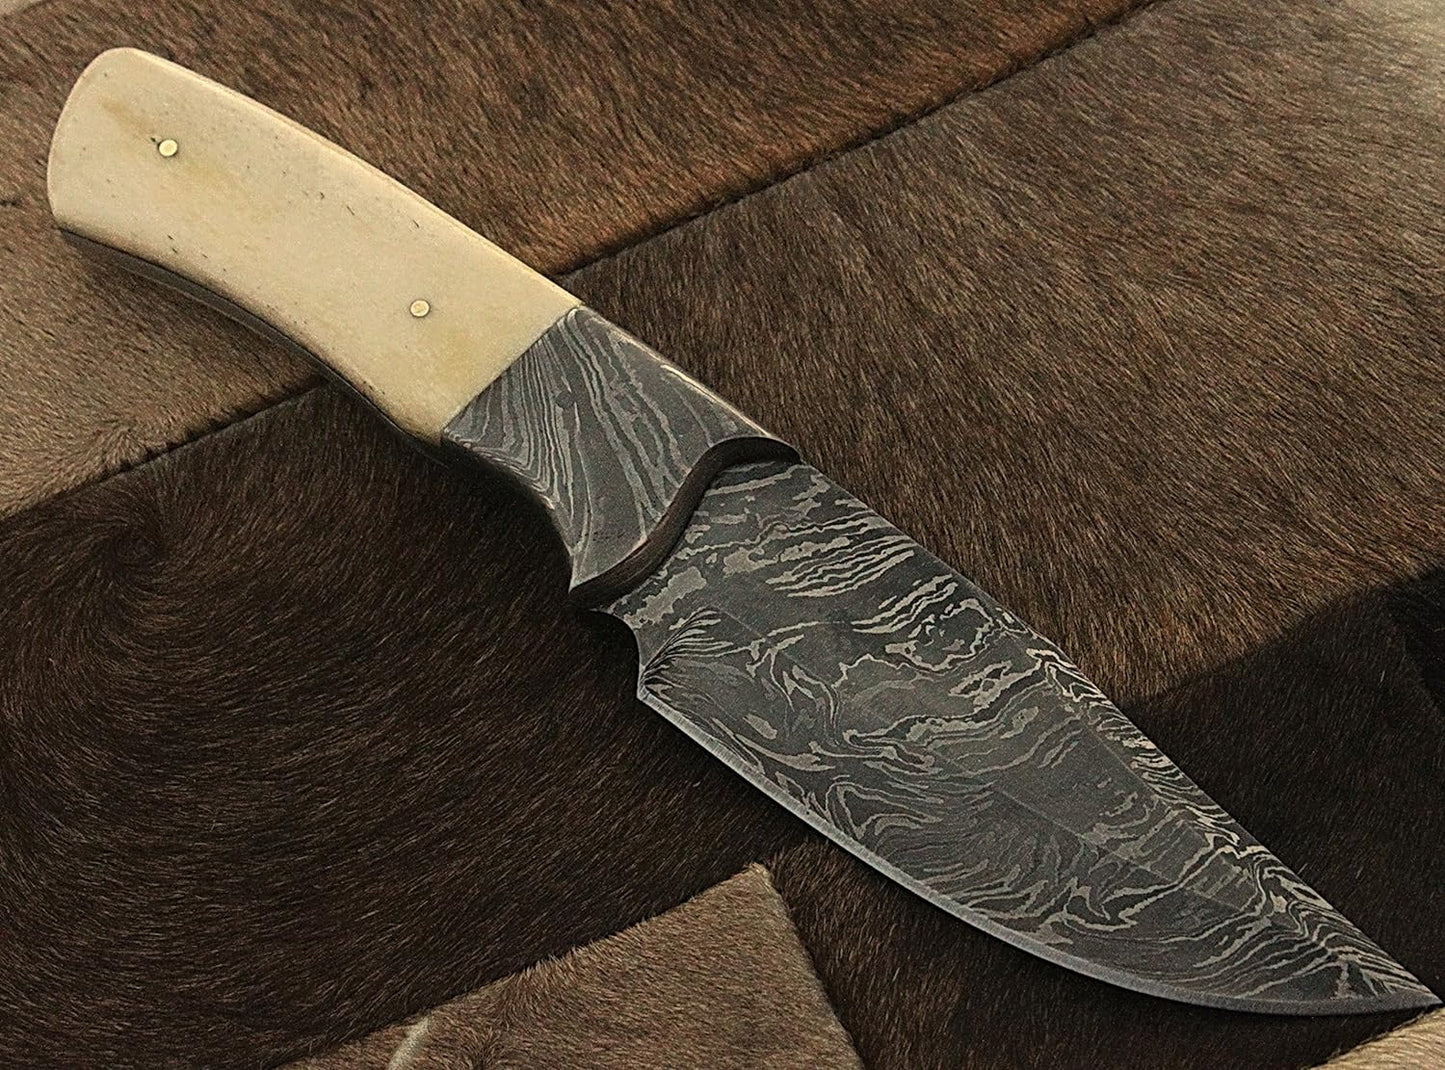 KD Hunting Knife Damascus Steel with Real Leather Sheath